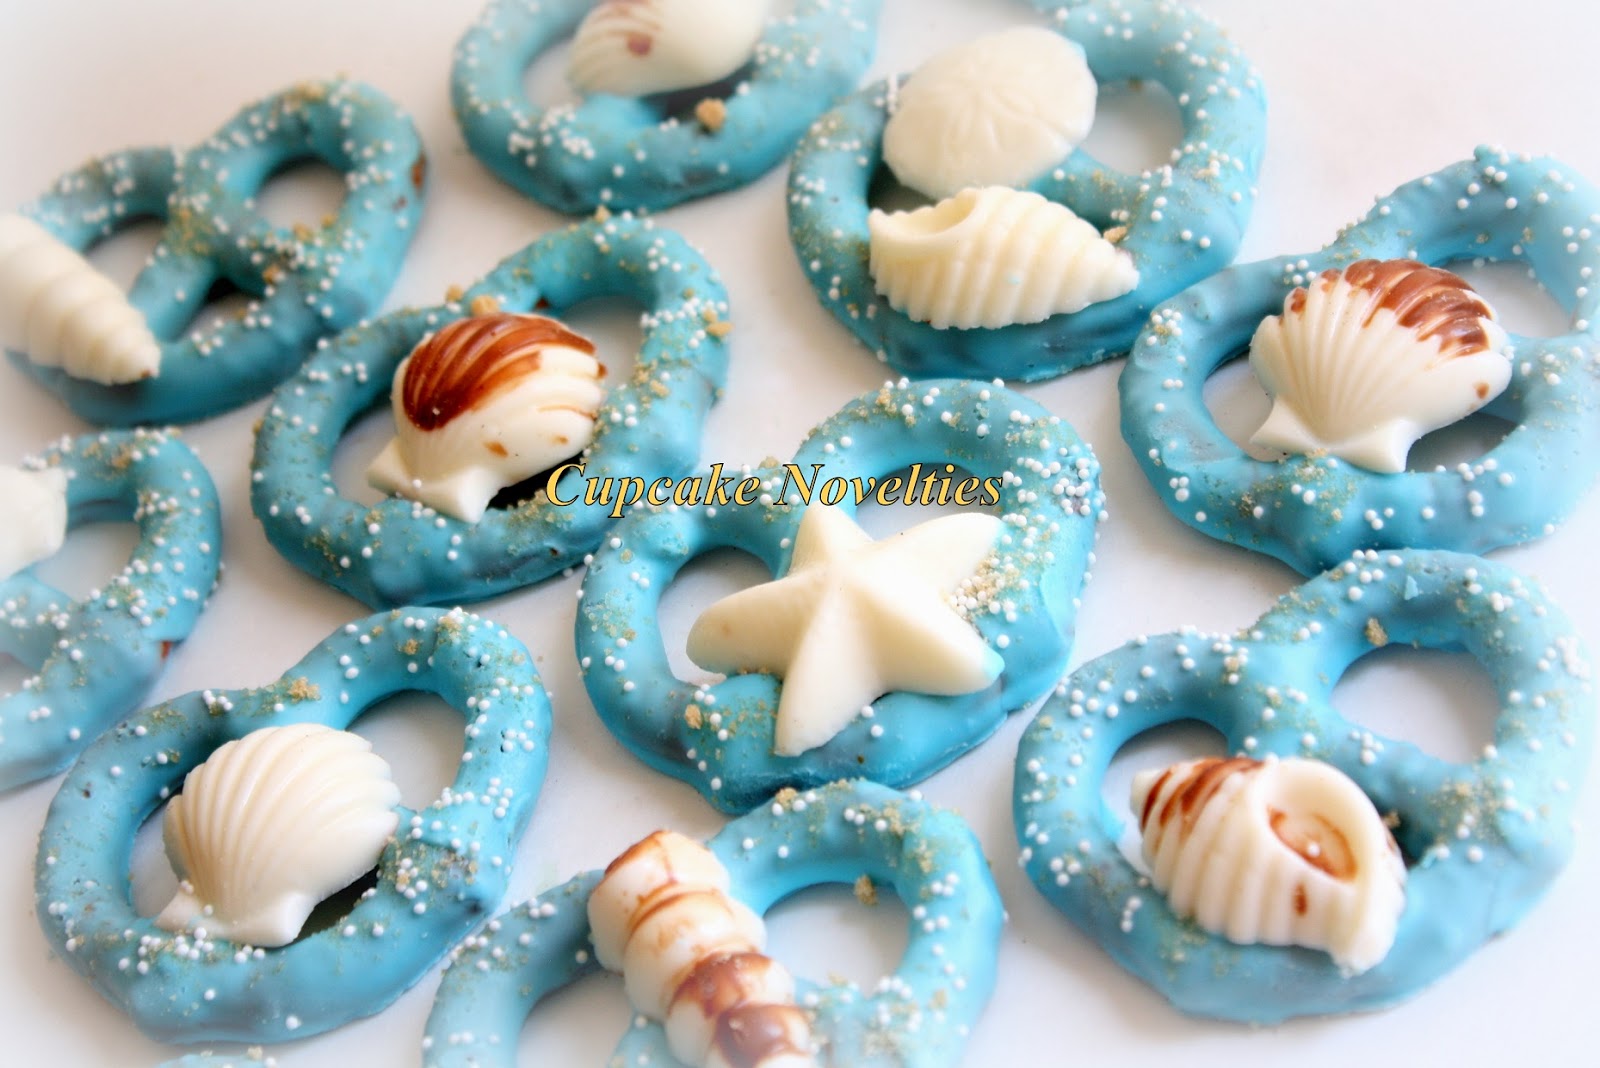 Cupcake Novelties Cakes Cupcakes Wedding Cakes Cake Pops Cookies Pie Pops In Fairfax Va Under The Sea Themed Seashell Topped Chocolate Dipped Pretzels Under The Sea Party Favors Cookies Dessert Table